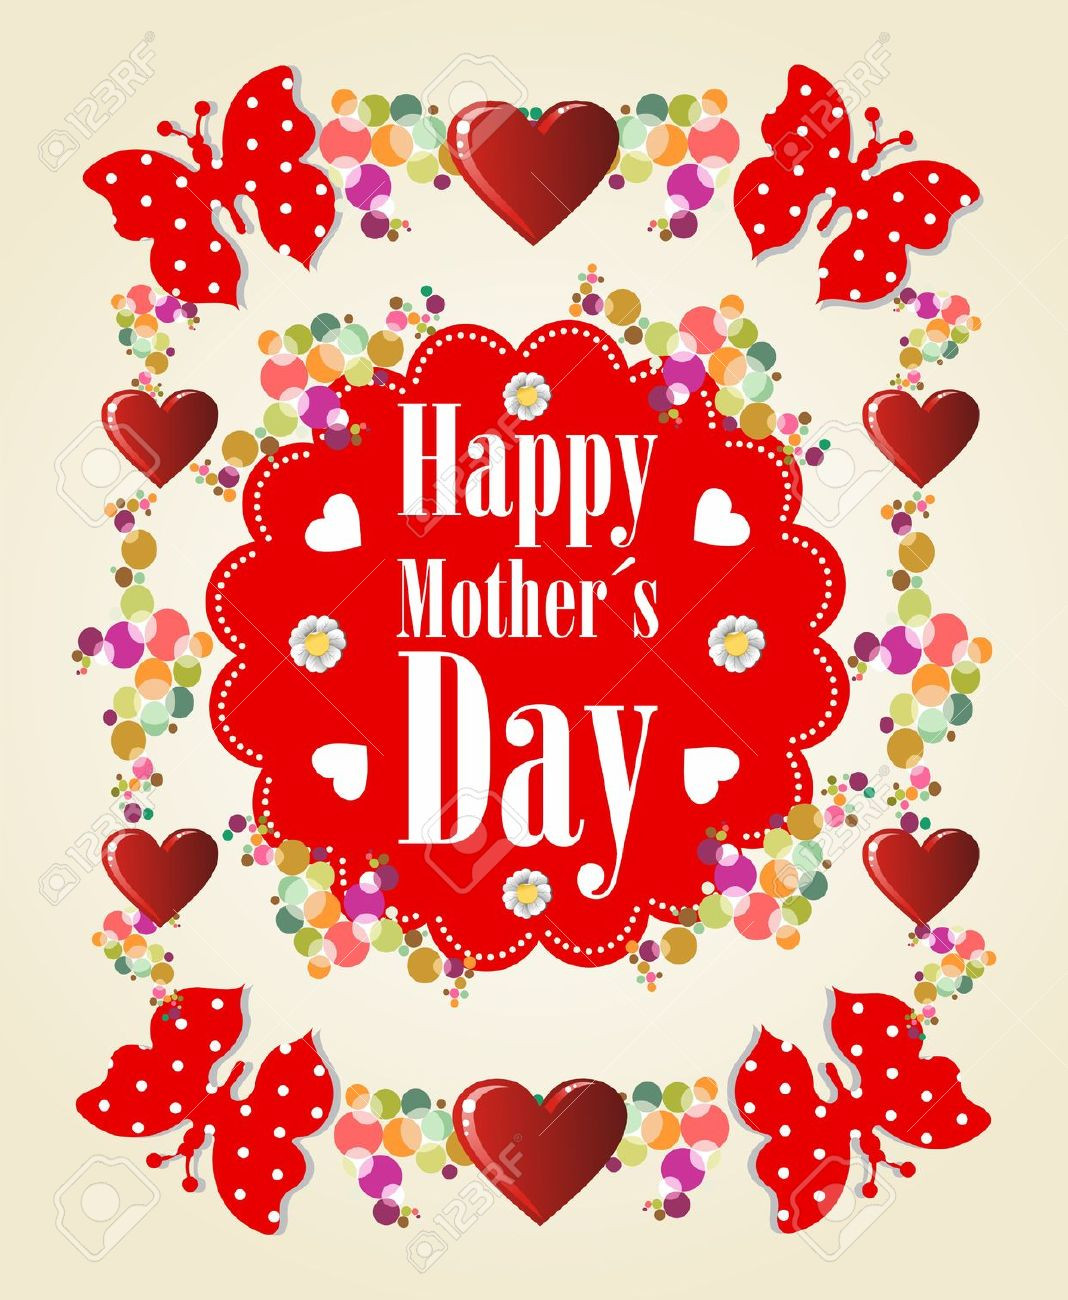 Happy Mothers Day 2017 Quotes
 Mothers day Inspirational Quotes 2017 Happy Valentines